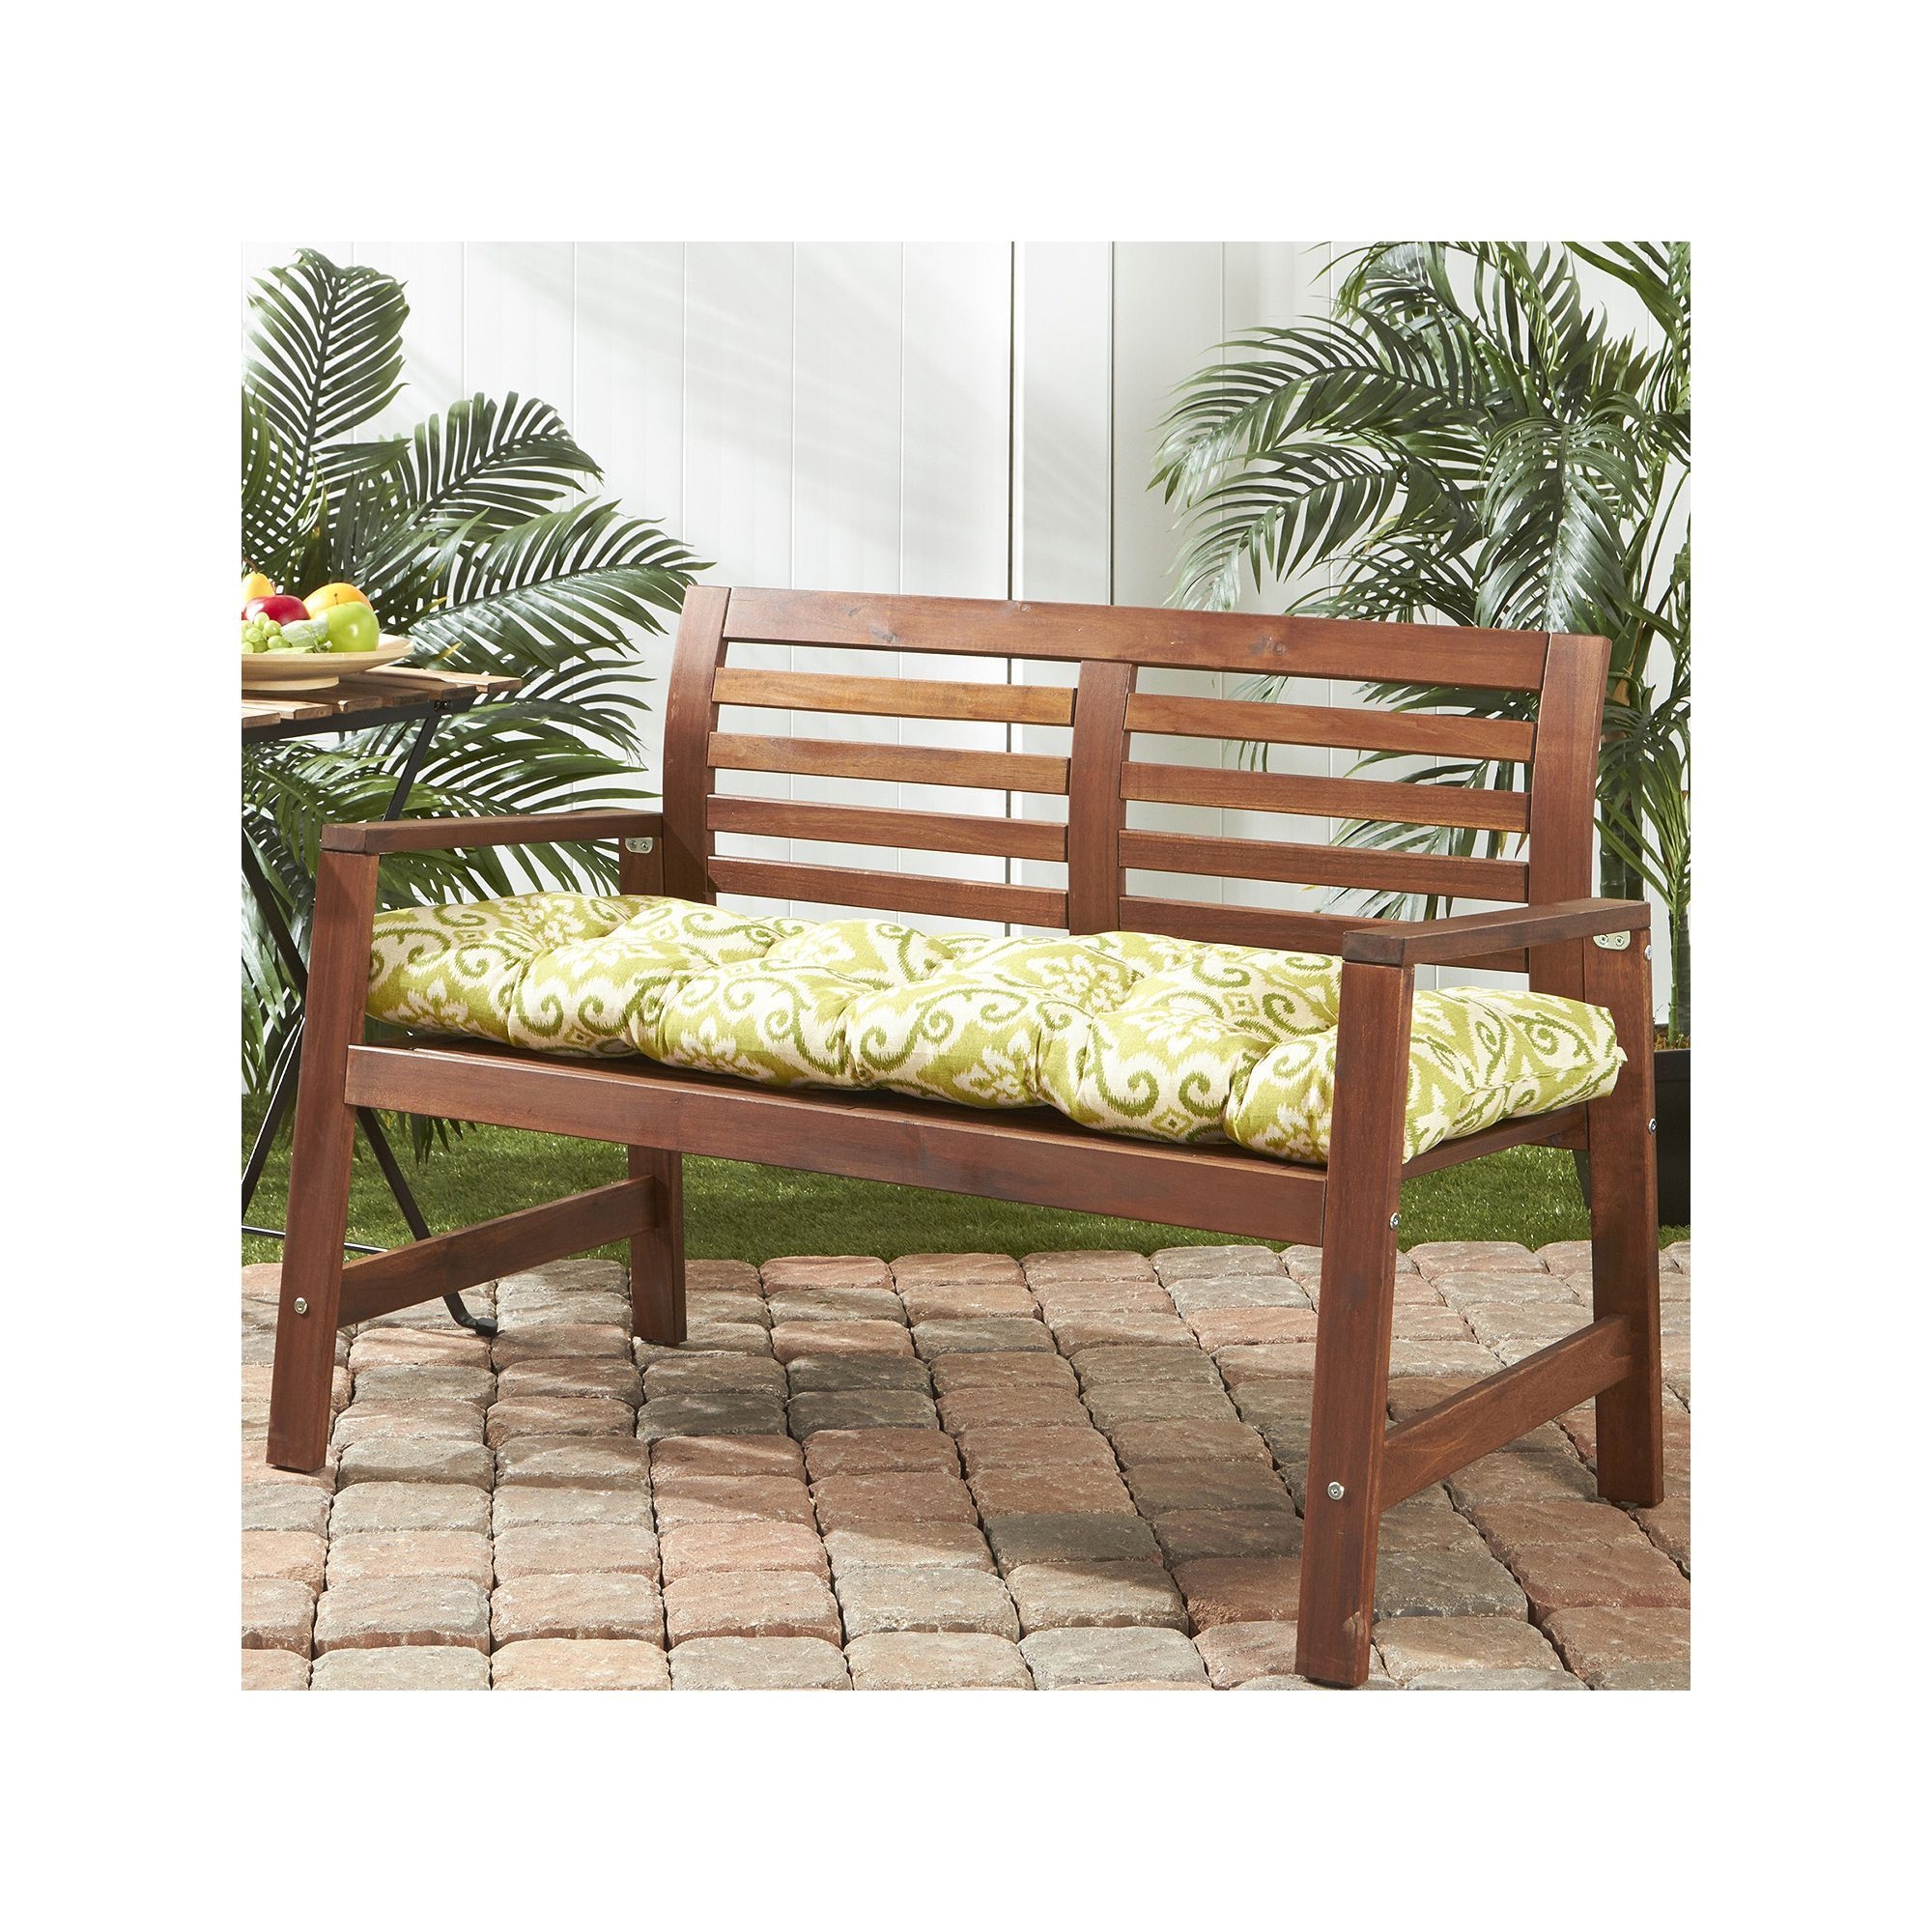 greendale home fashions outdoor bench cushion blue other